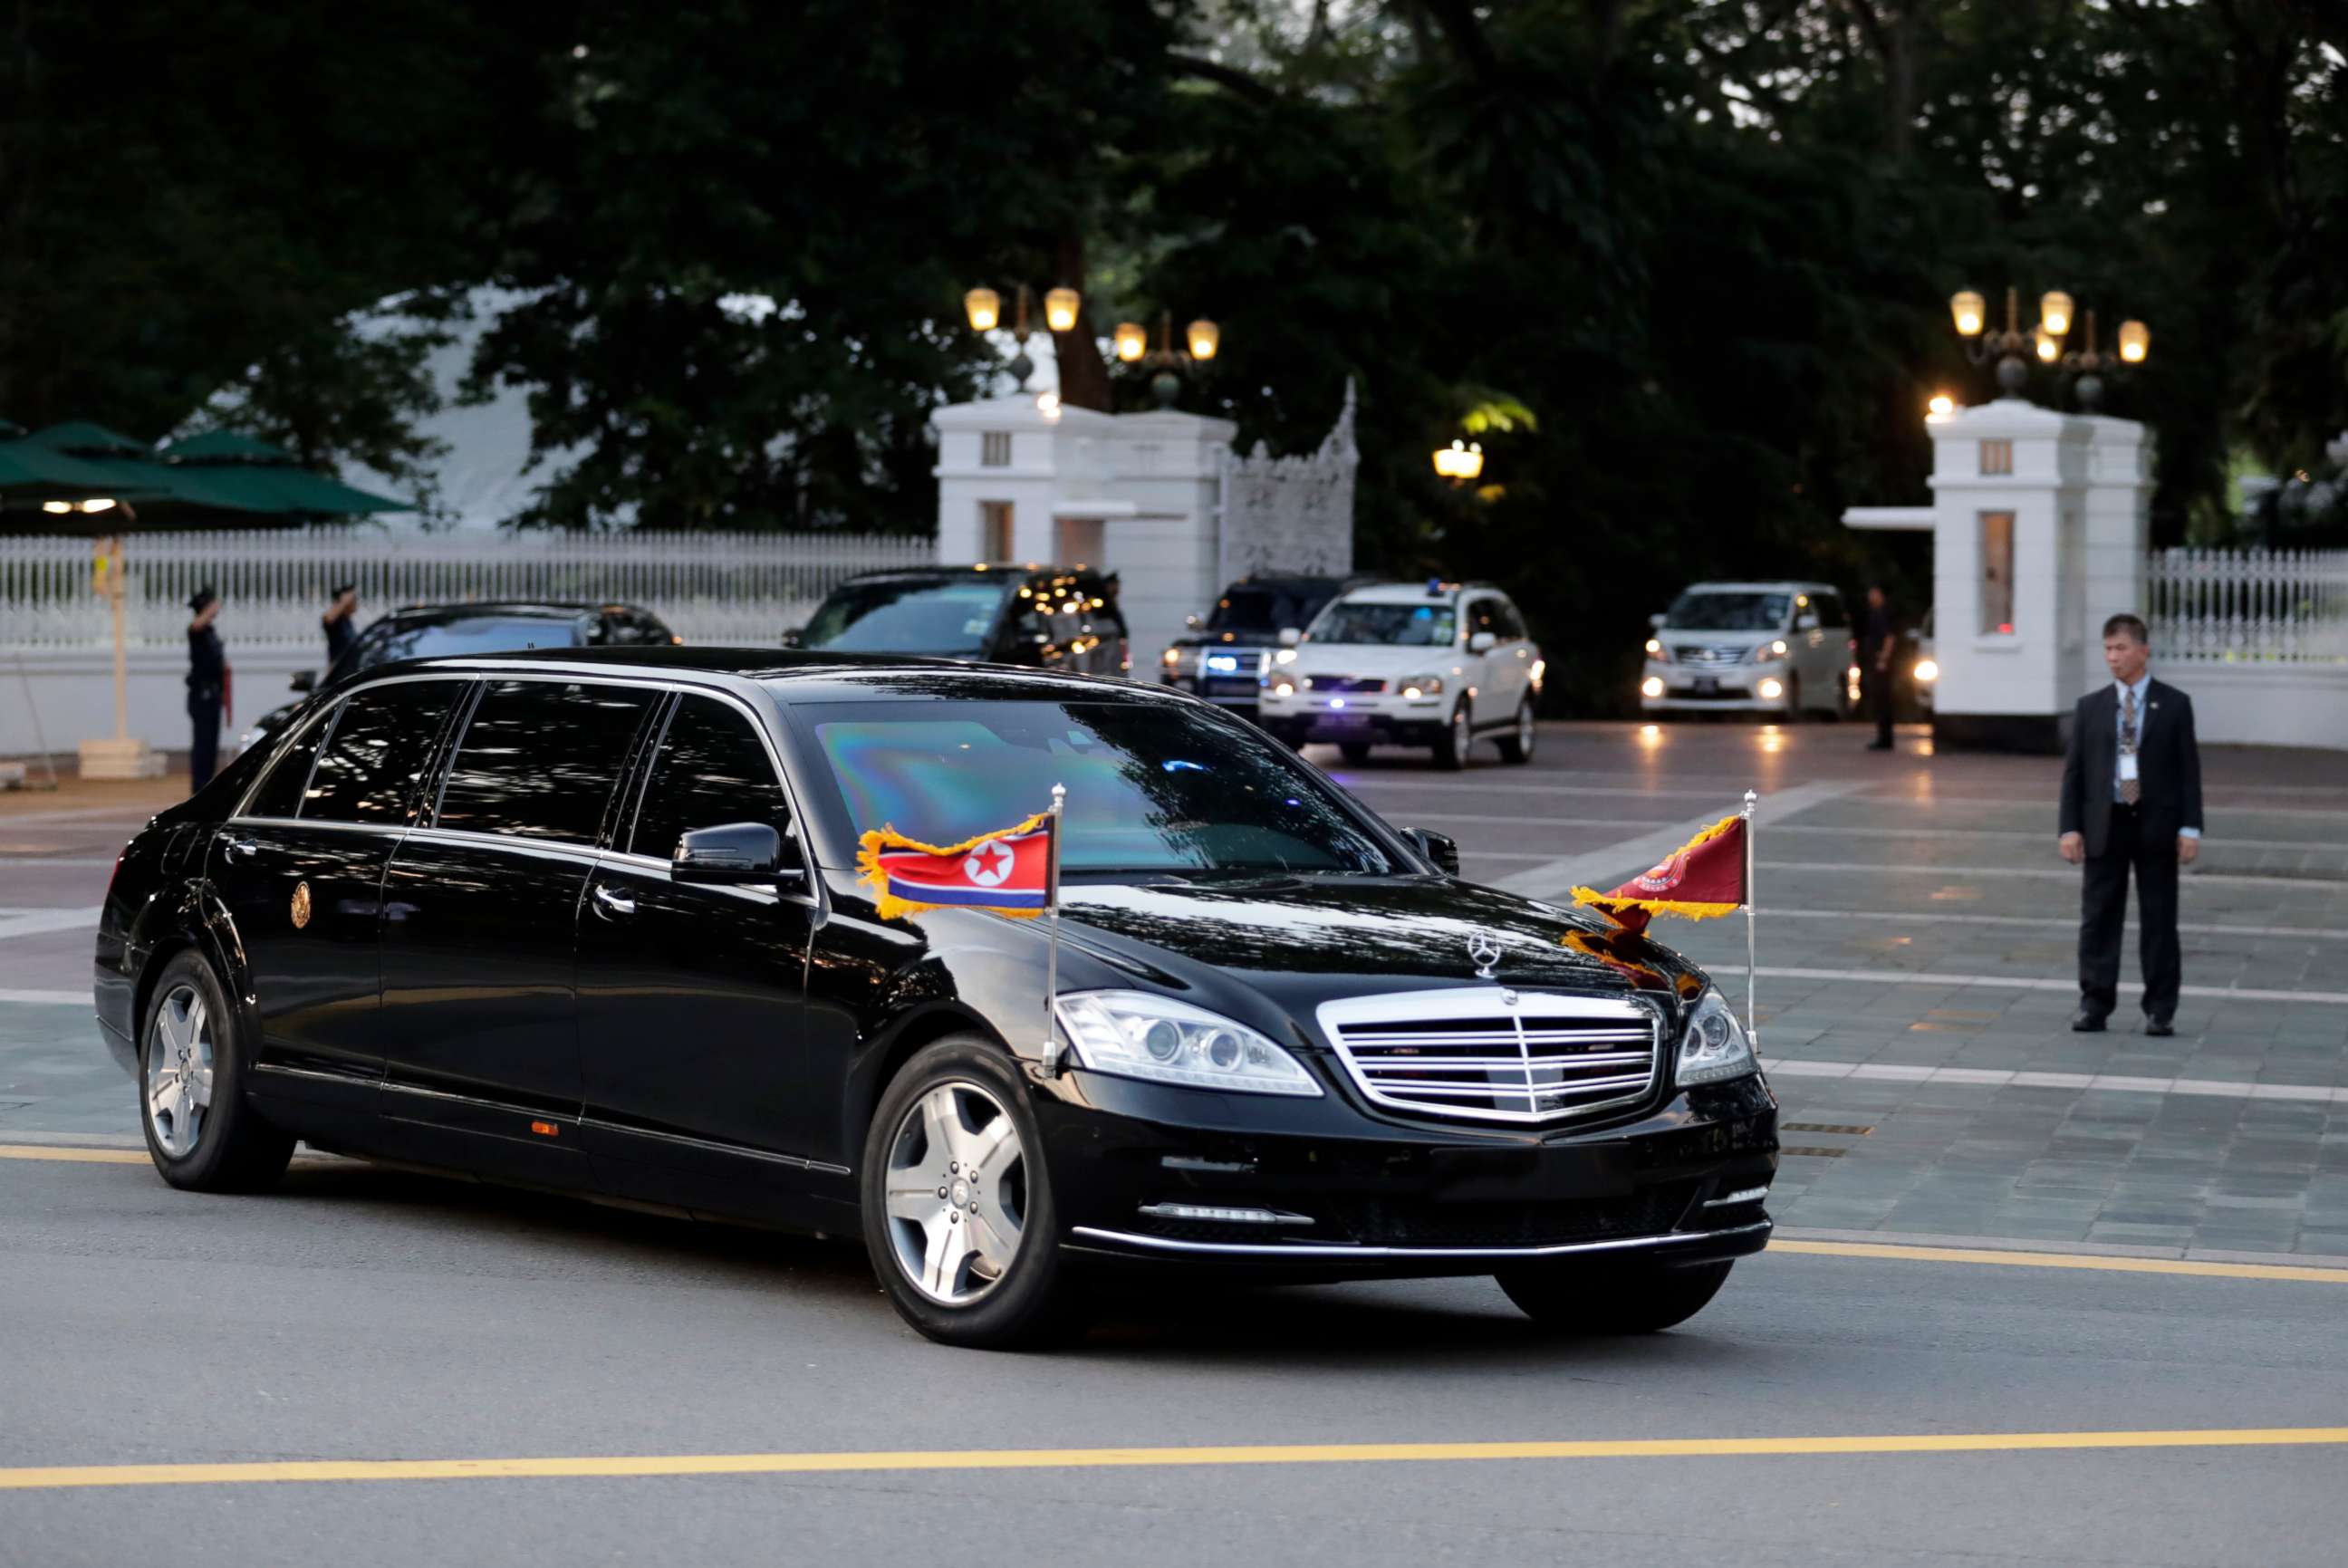 PHOTO: The car with flags flying carrying North Korean leader Kim Jong-un leaves Istana Presidential Palace after a meeting with Singapore Prime Minister Lee Hsien Loong in Singapore, June 10, 2018.